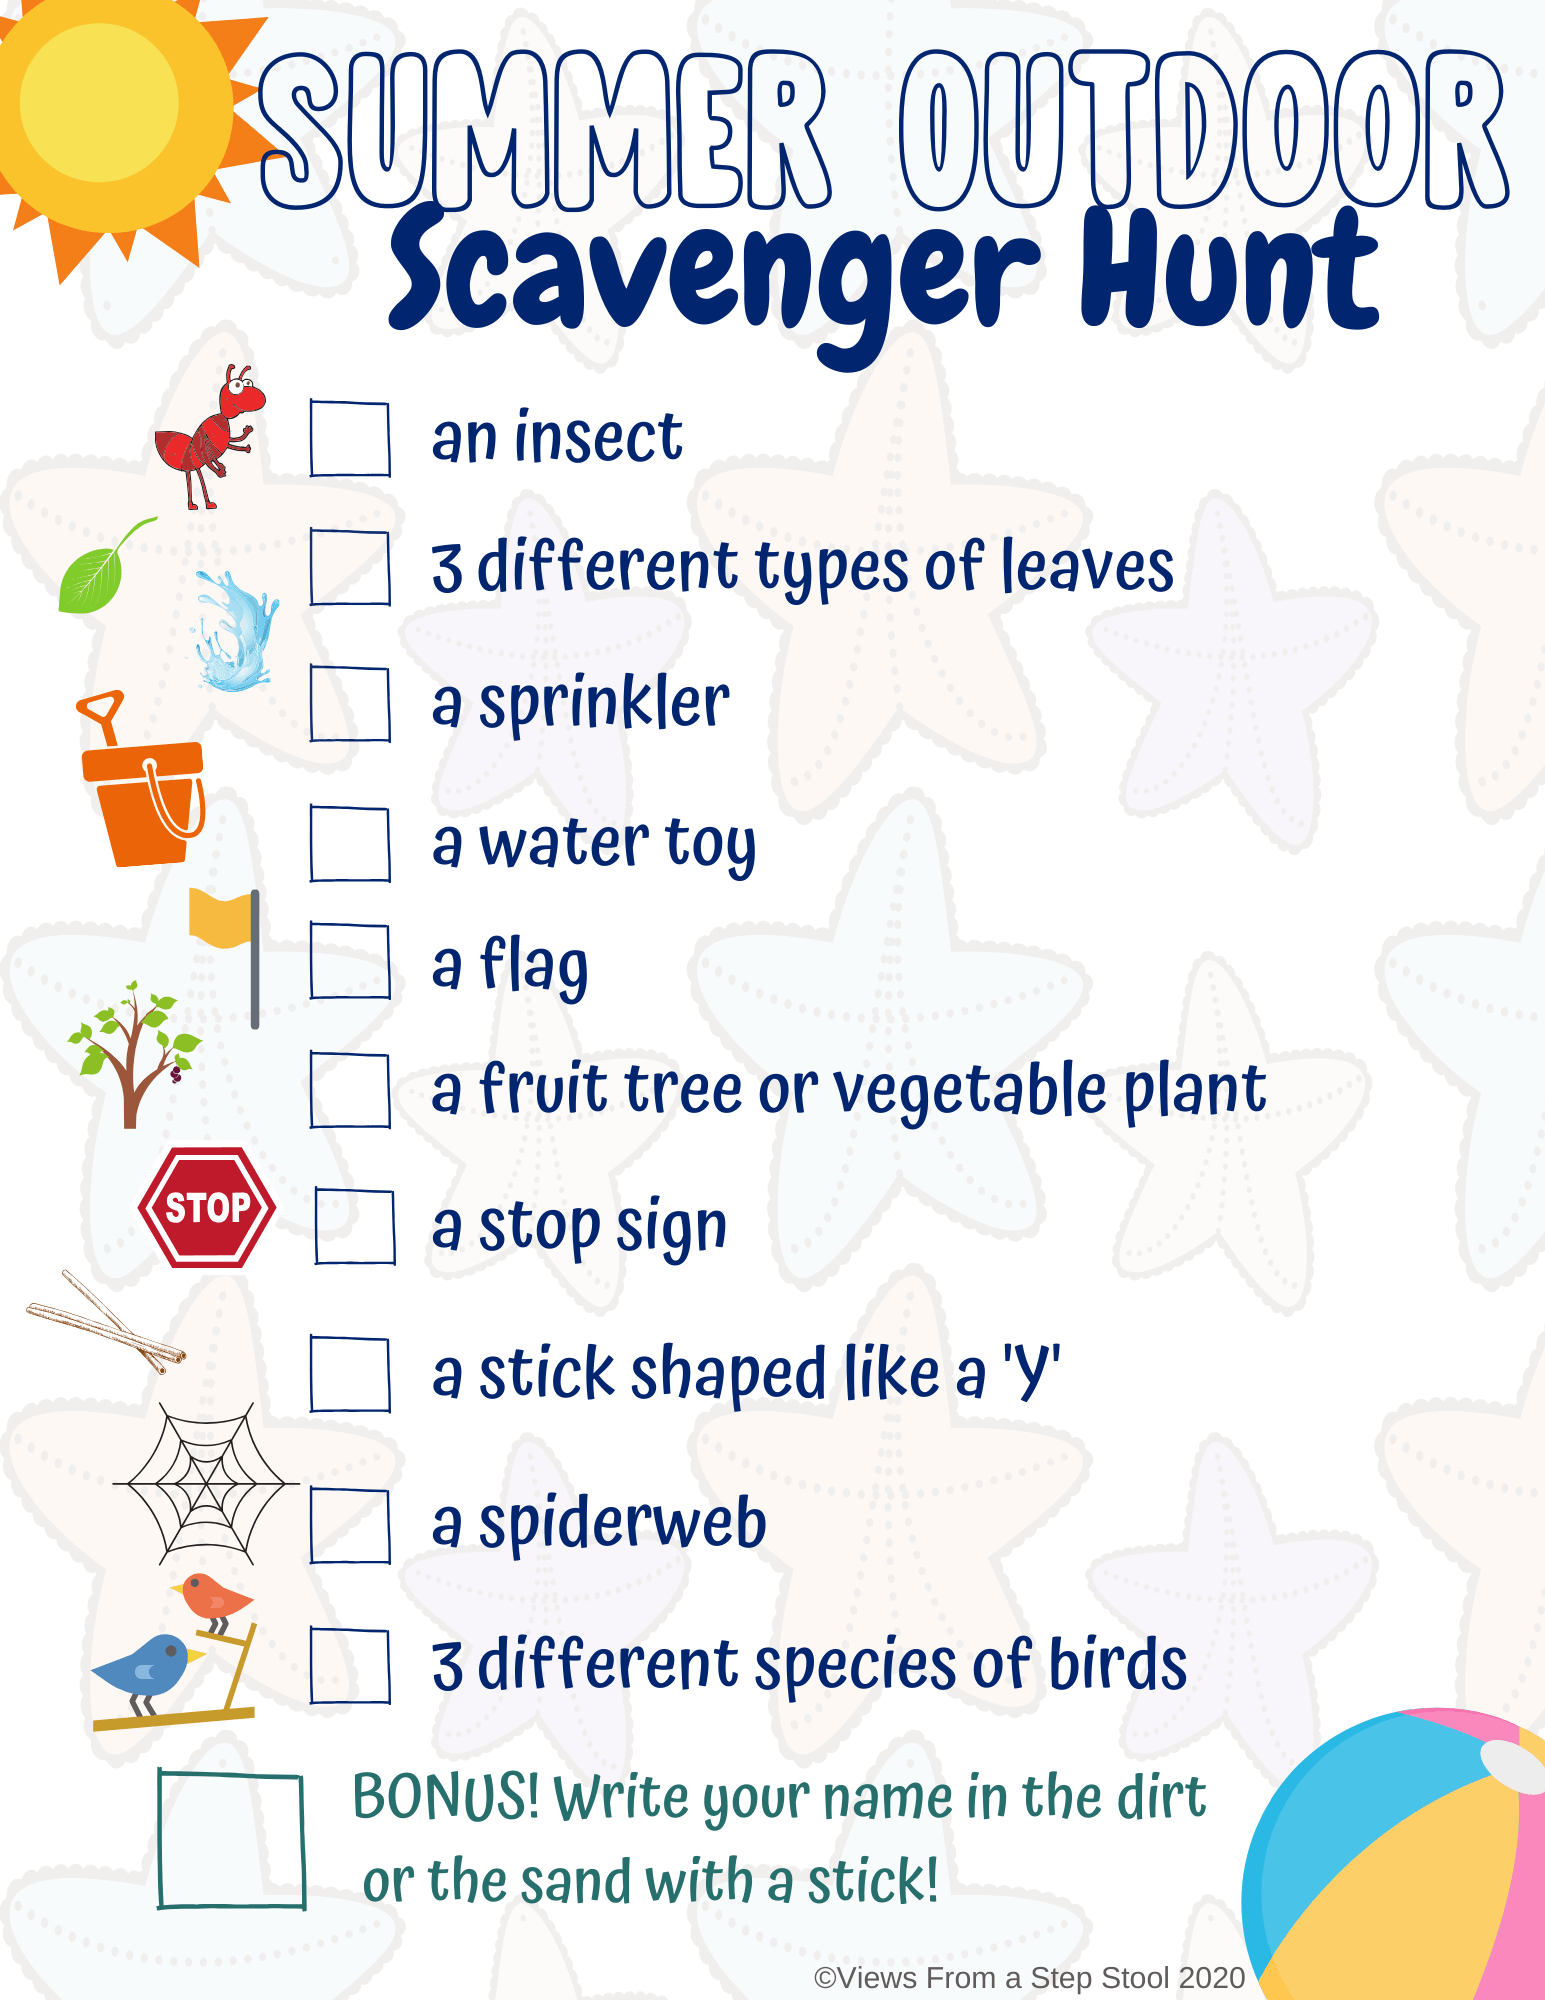 Summer Outdoor Scavenger Hunt Printable Views From a Step Stool